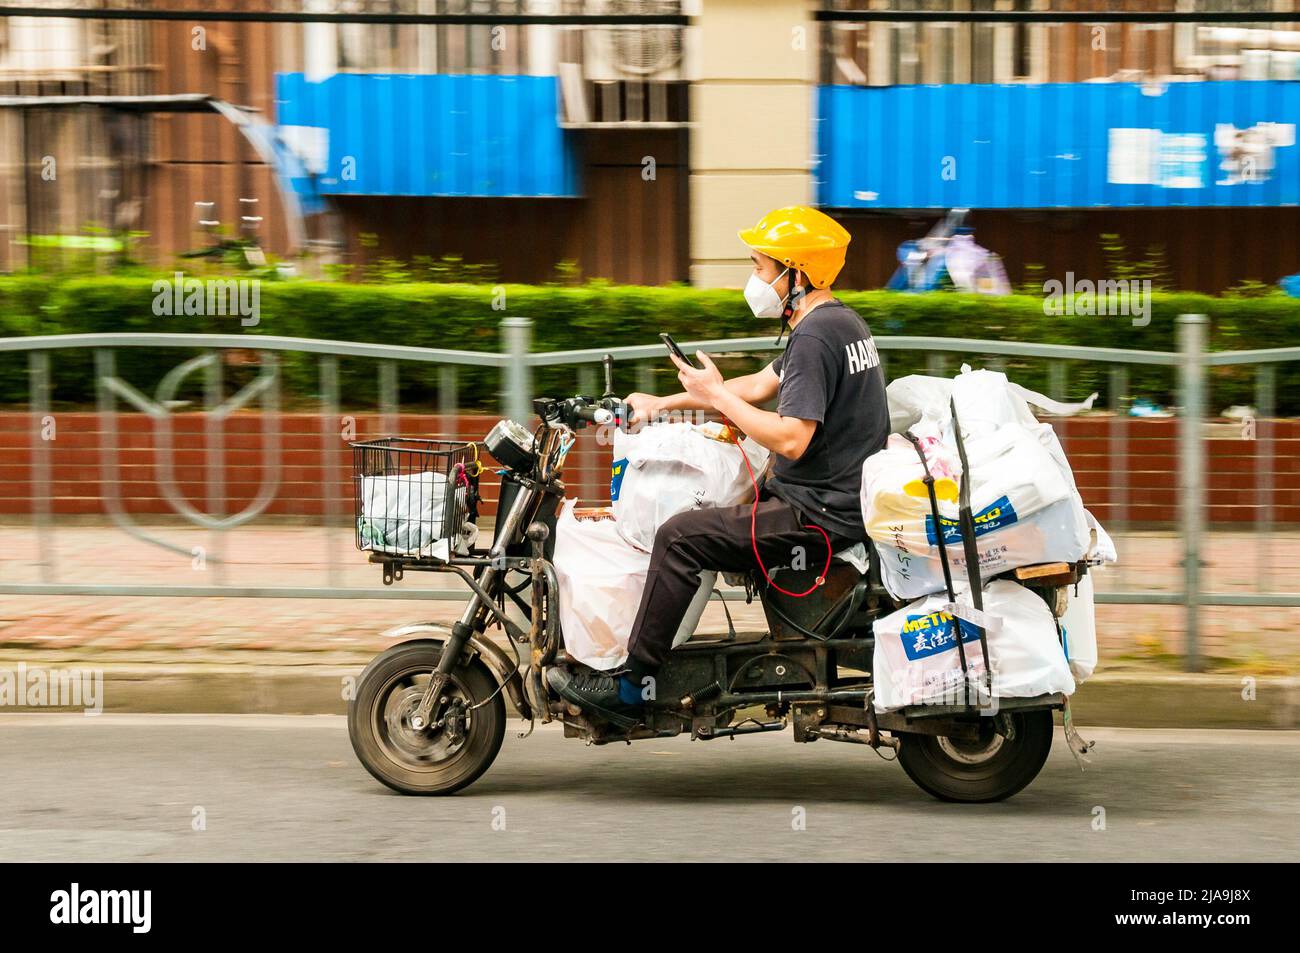 A delivery rider checks his phone while riding a scooter laden with bags from Metro supermarket in Putuo District, Shanghai, China during the end of S Stock Photo